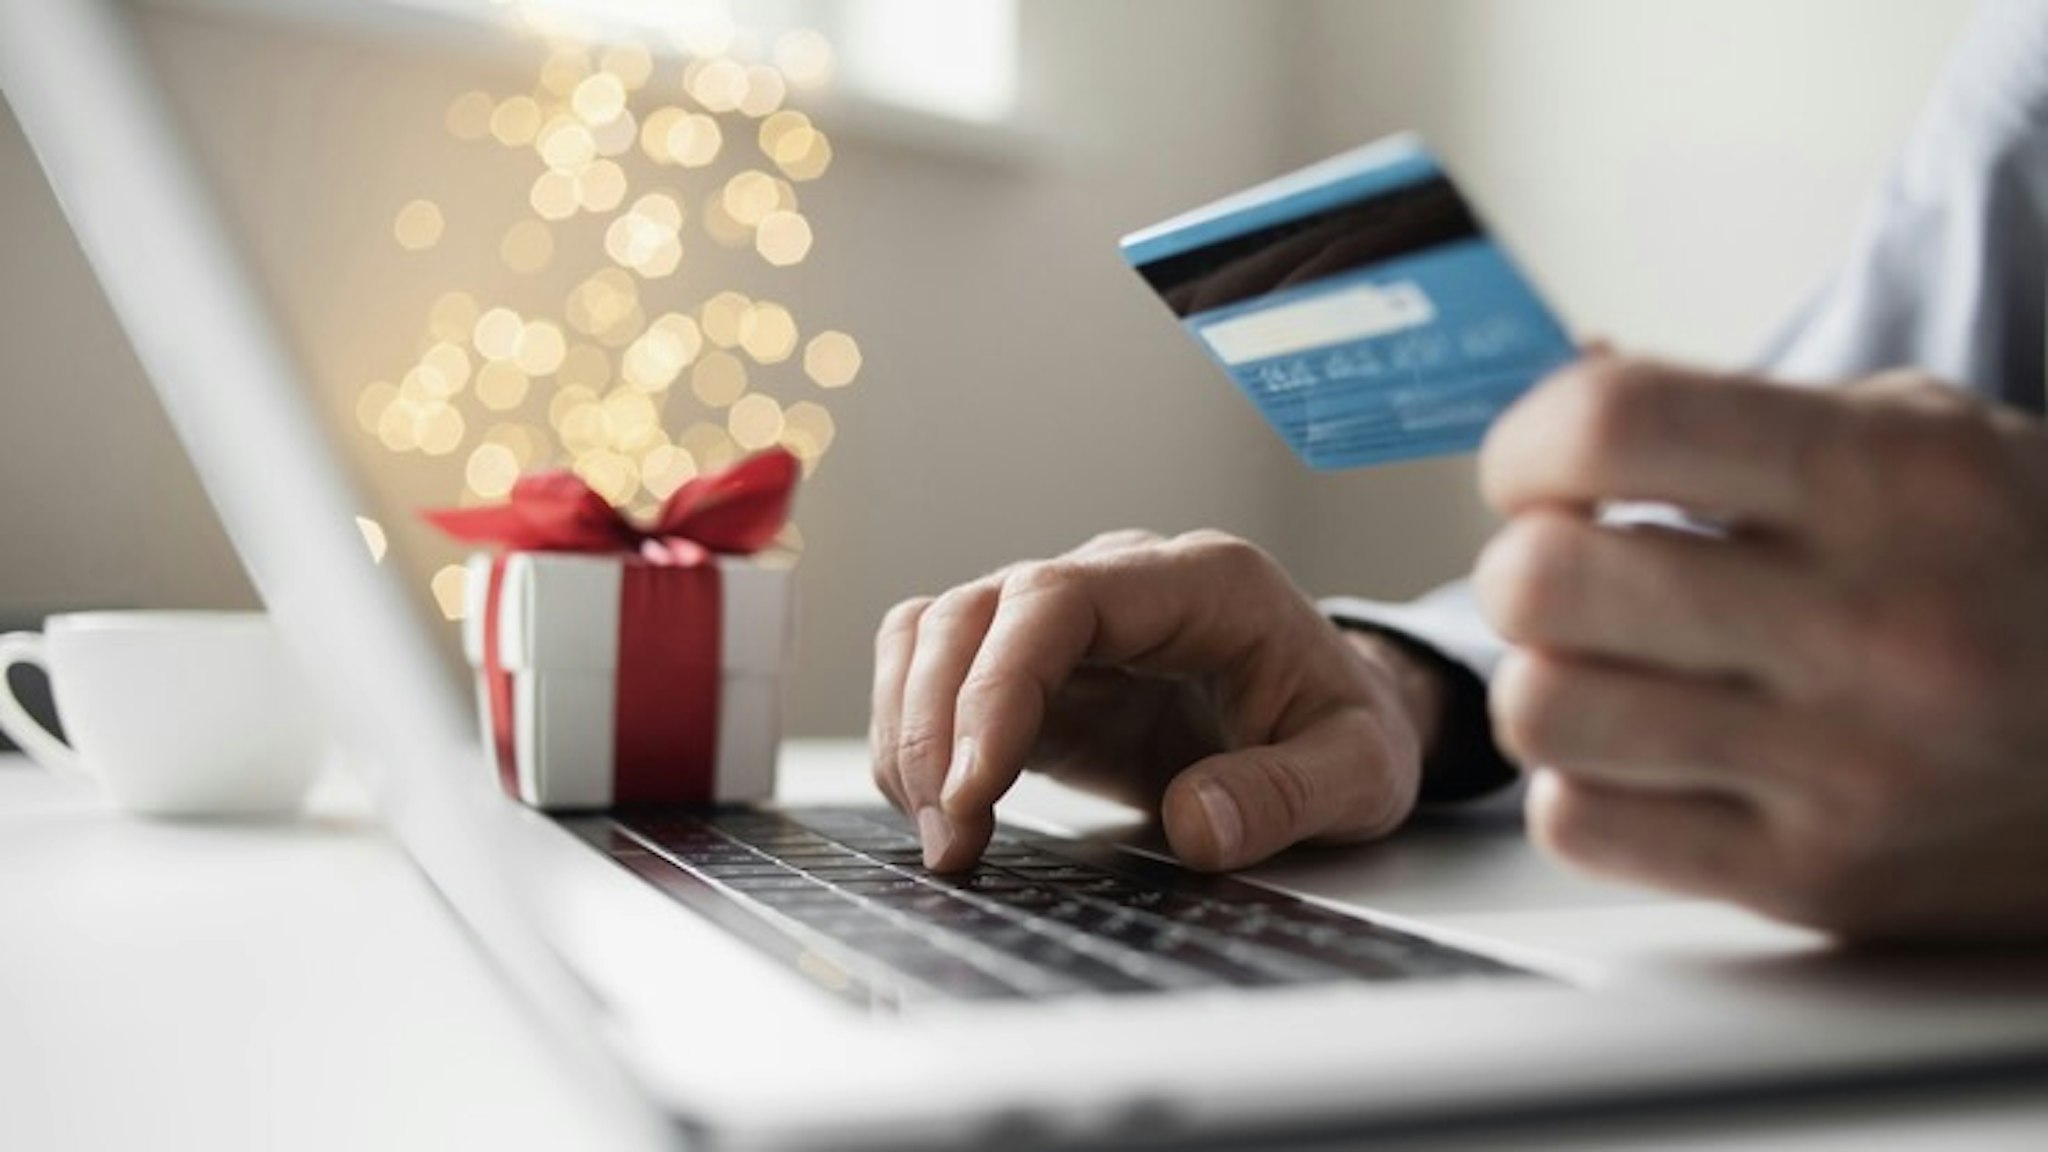 Online shopping during holidays. Man ordering Christmas gift using laptop and credit card - stock photo Ordering Christmas presents, online payment. Online shopping, internet banking, spending money, holidays, vacations concept Poike via Getty Images